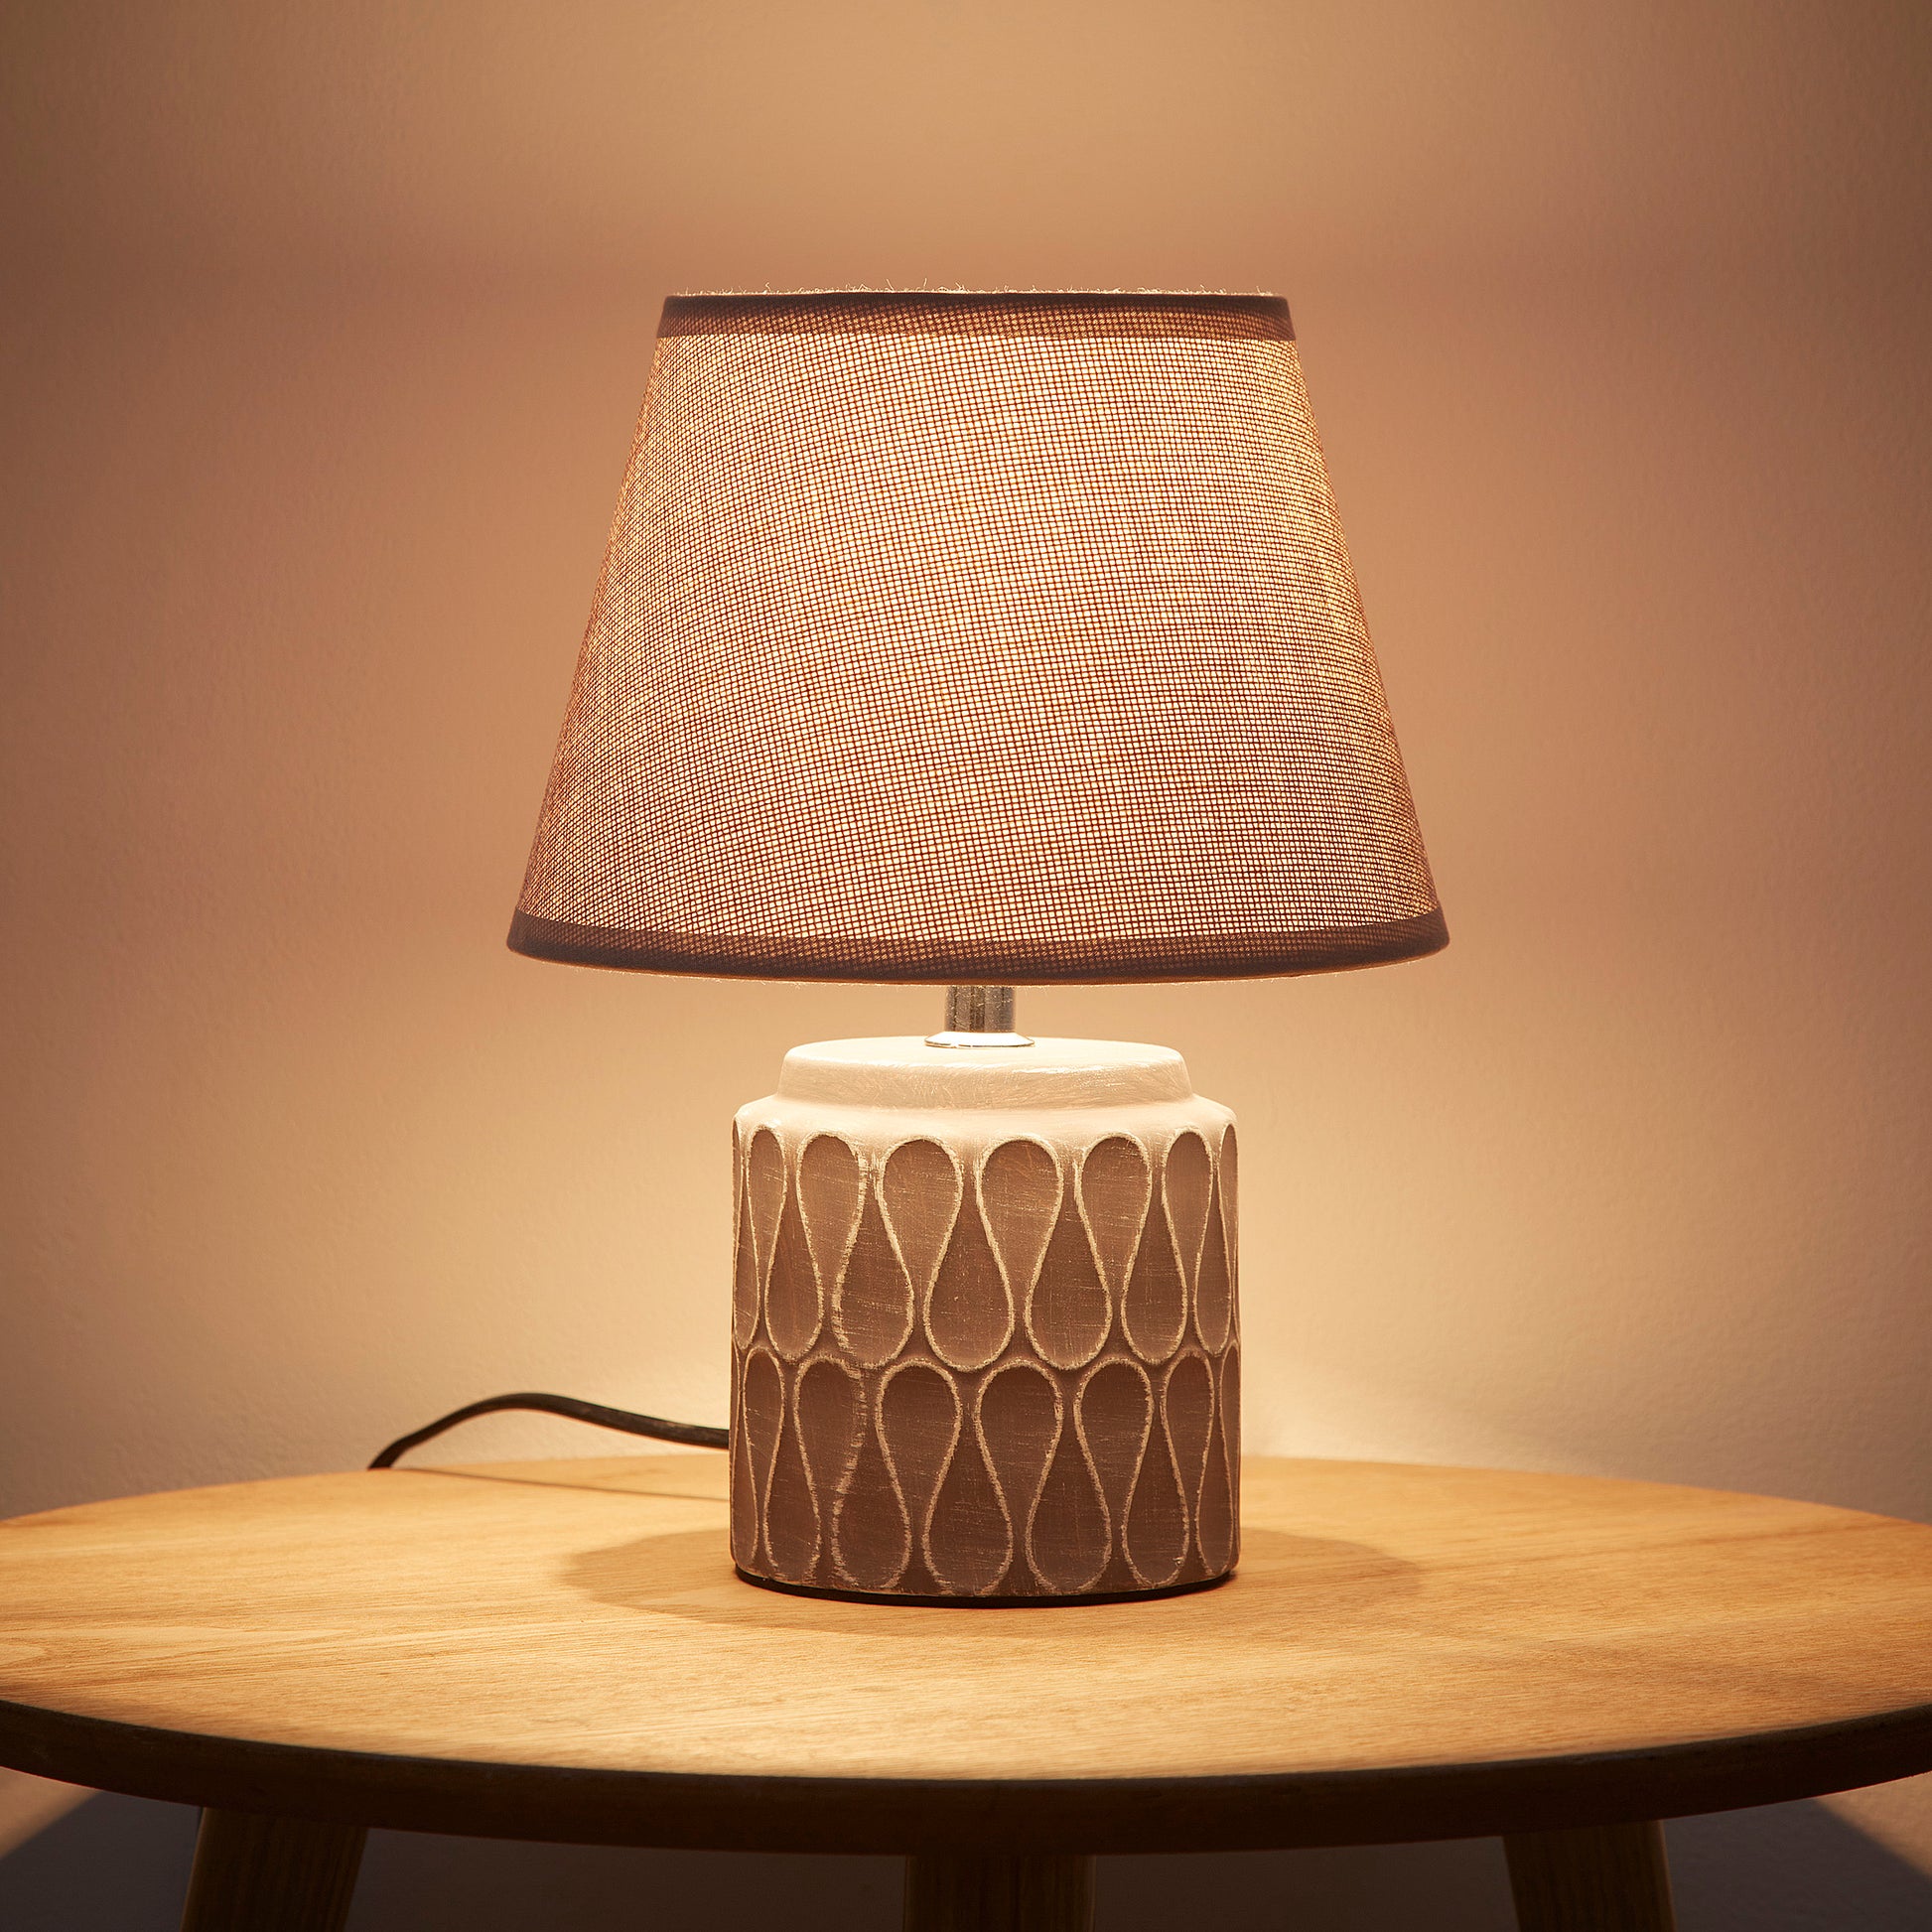 Grey Ceramic Table Lamp with a Matching Grey Linen Lamp shade with Tapered edges